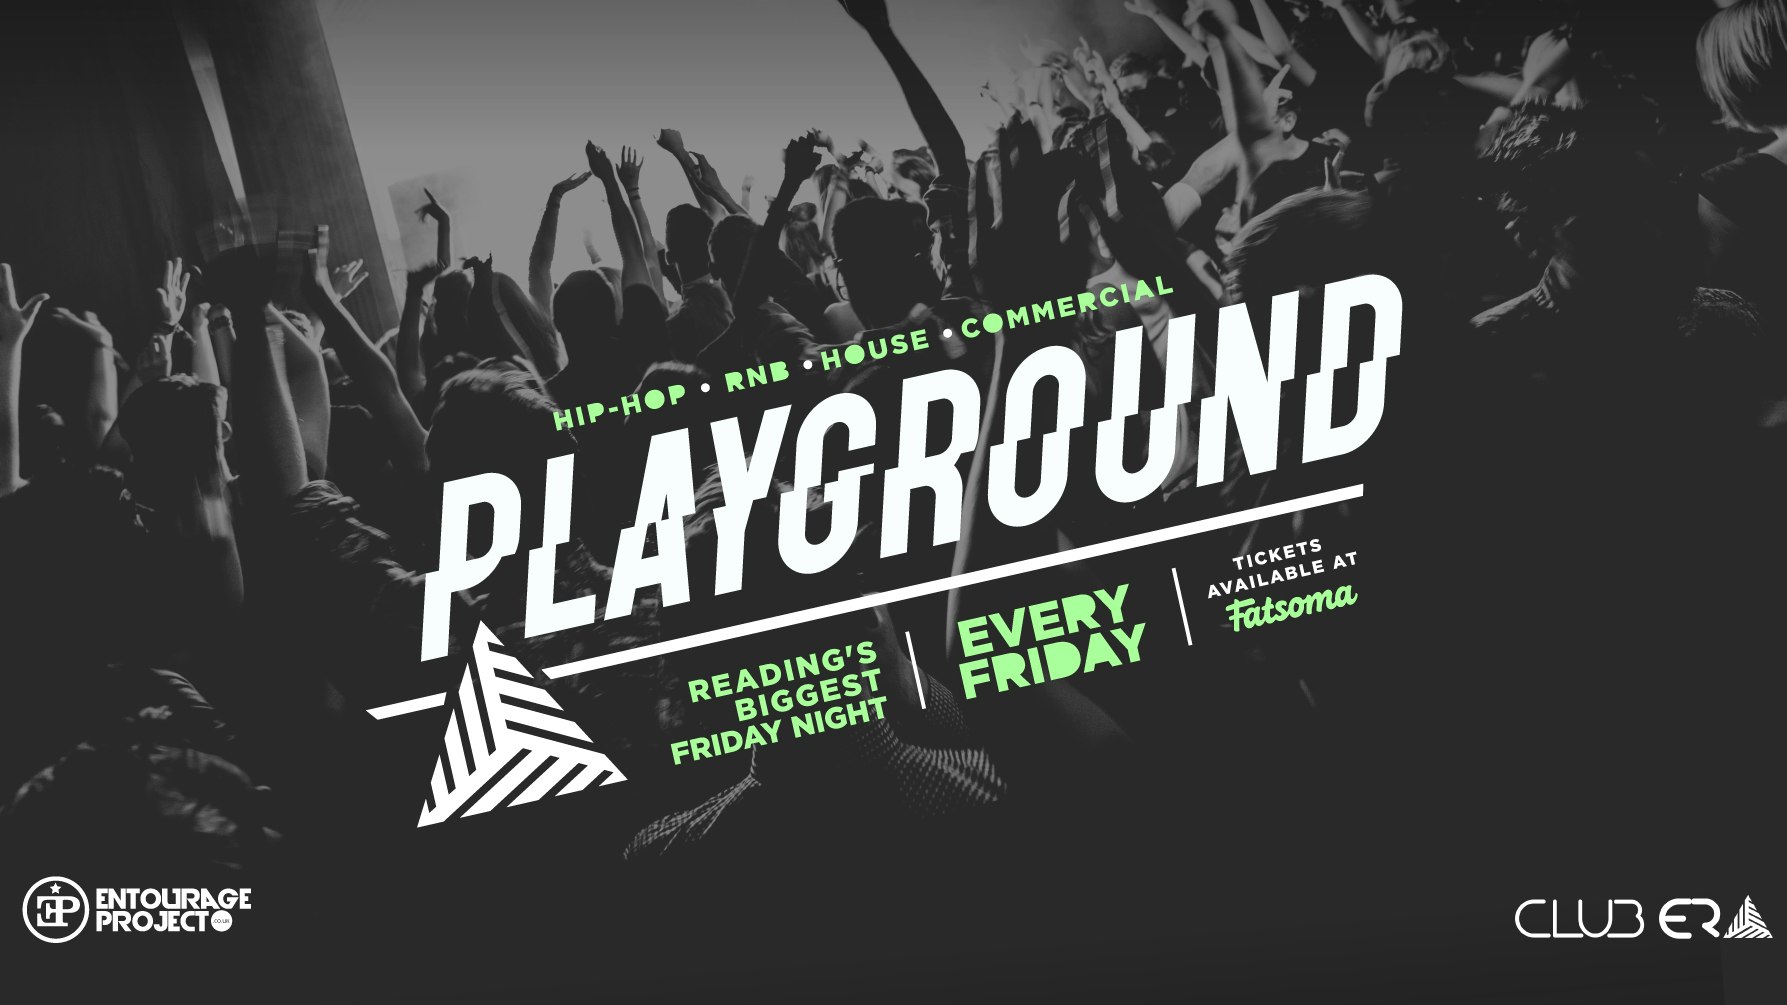 Playground Fridays – CANCELLED (tickets valid at LOLA LO)